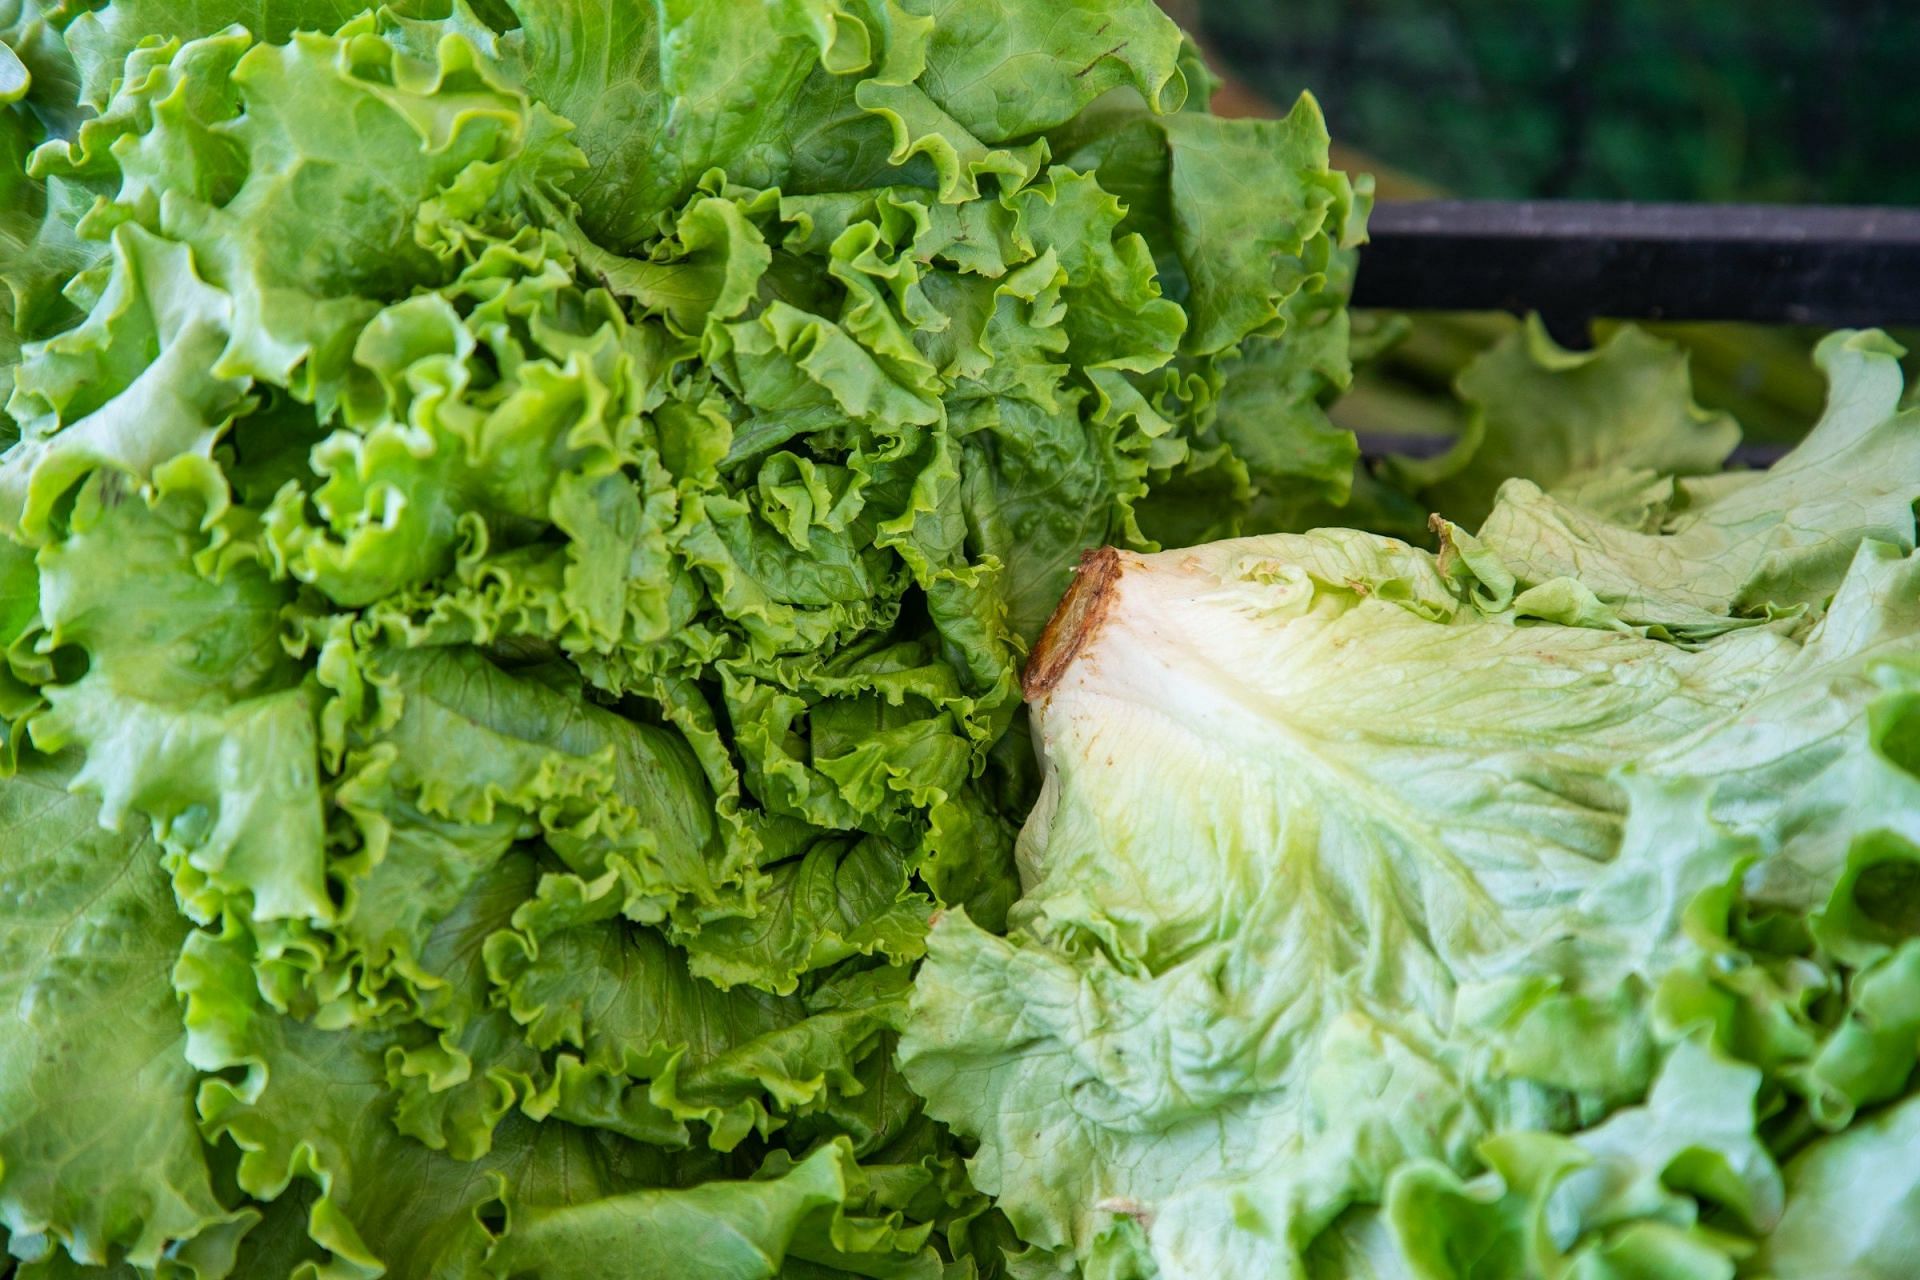 Iceberg lettuce used in sandwiches and salads has almost zero calories (Image by Engin Akyurt/Unsplash)